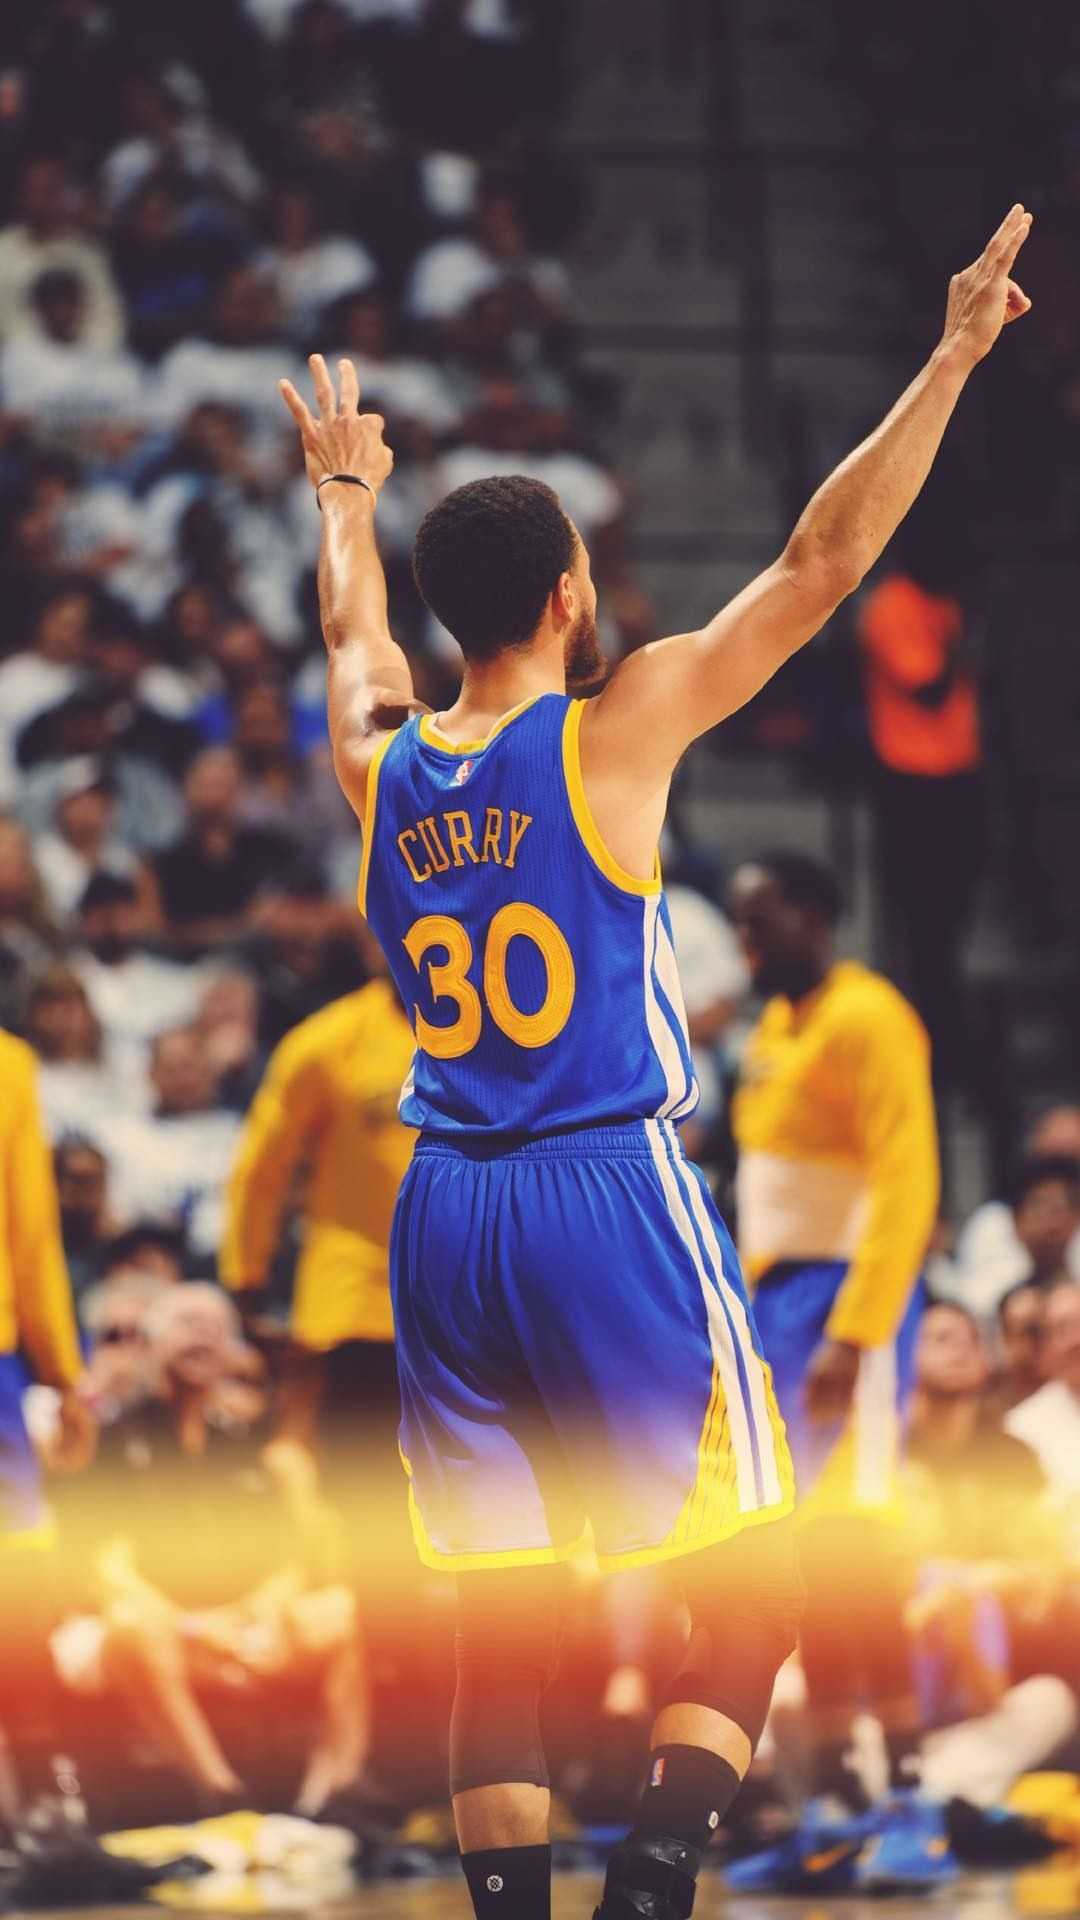 Stephen Curry Wallpaper - KoLPaPer - Awesome Free HD Wallpapers